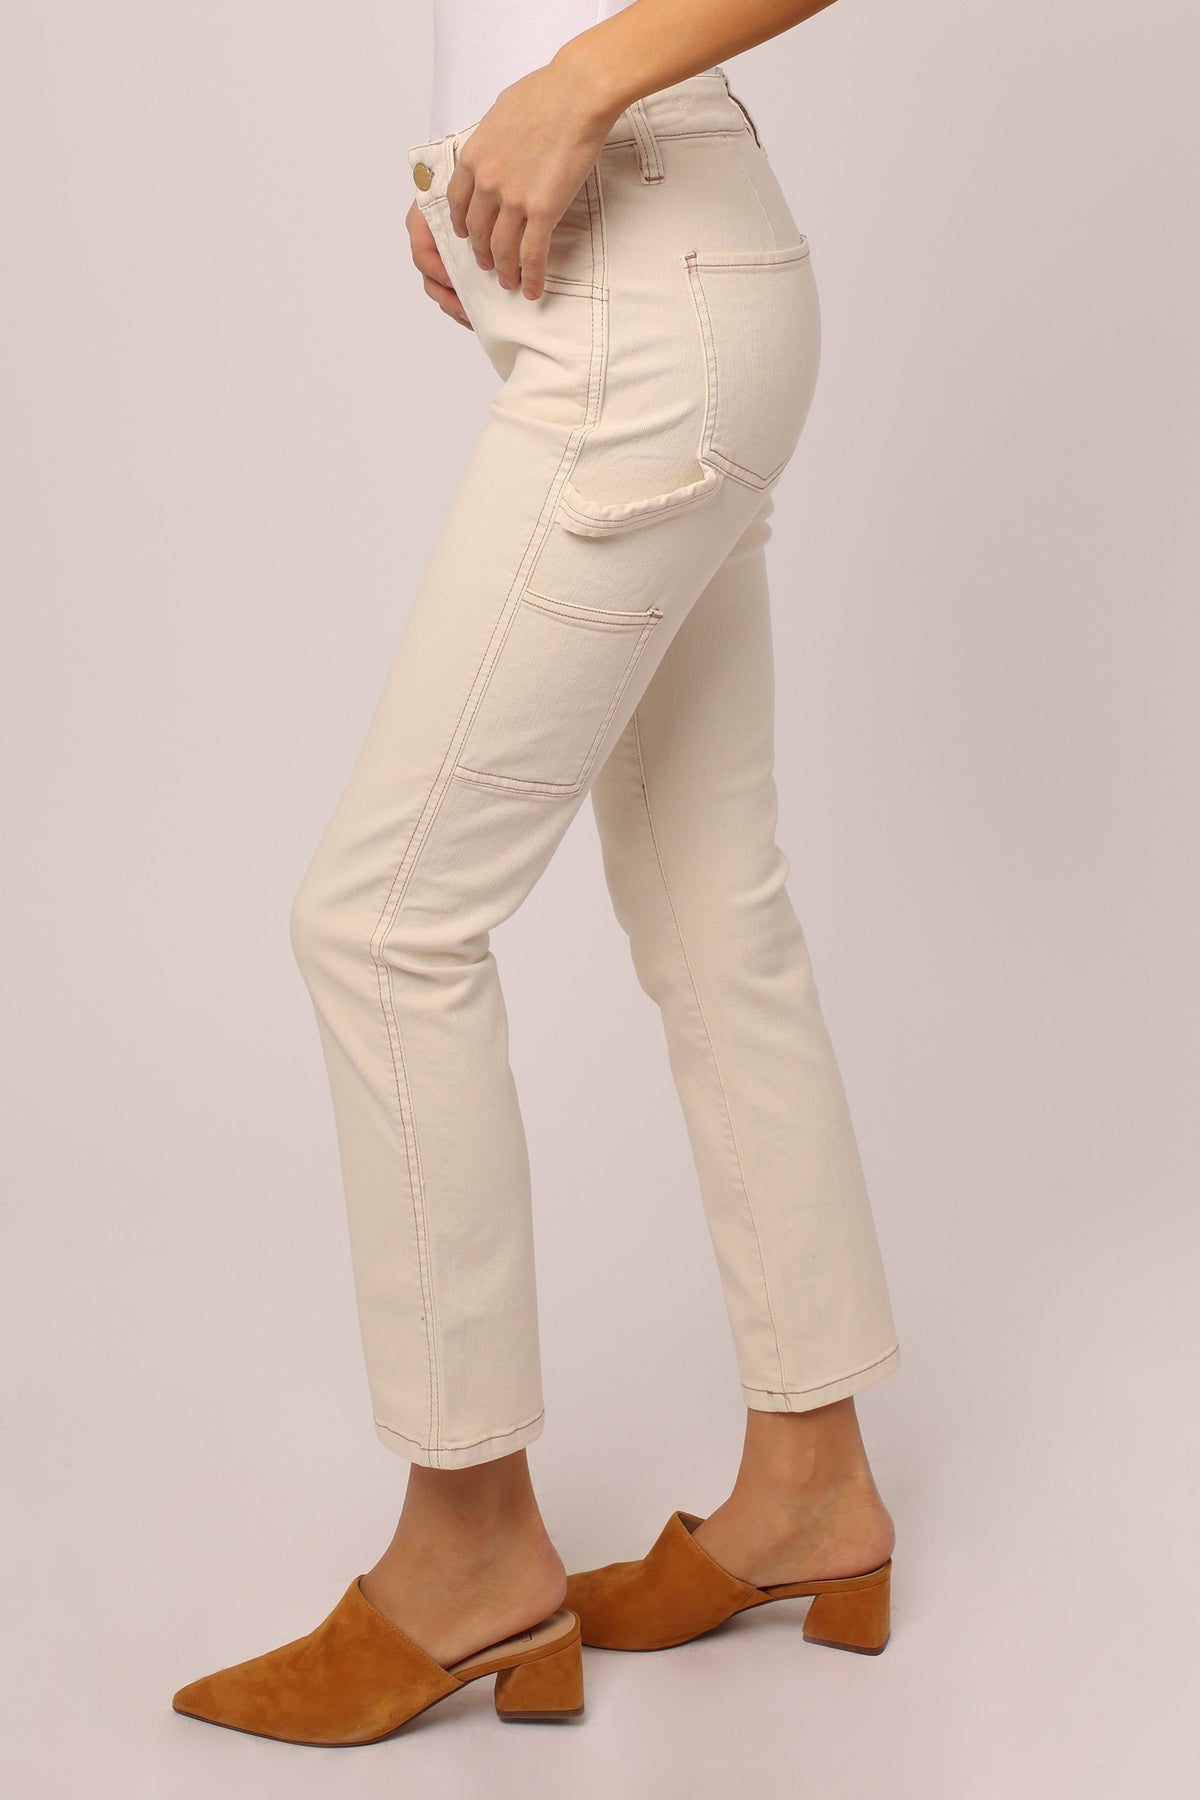 boutique shopping pensacola blaire ankle cargo straight pants wheat cream clothing pants